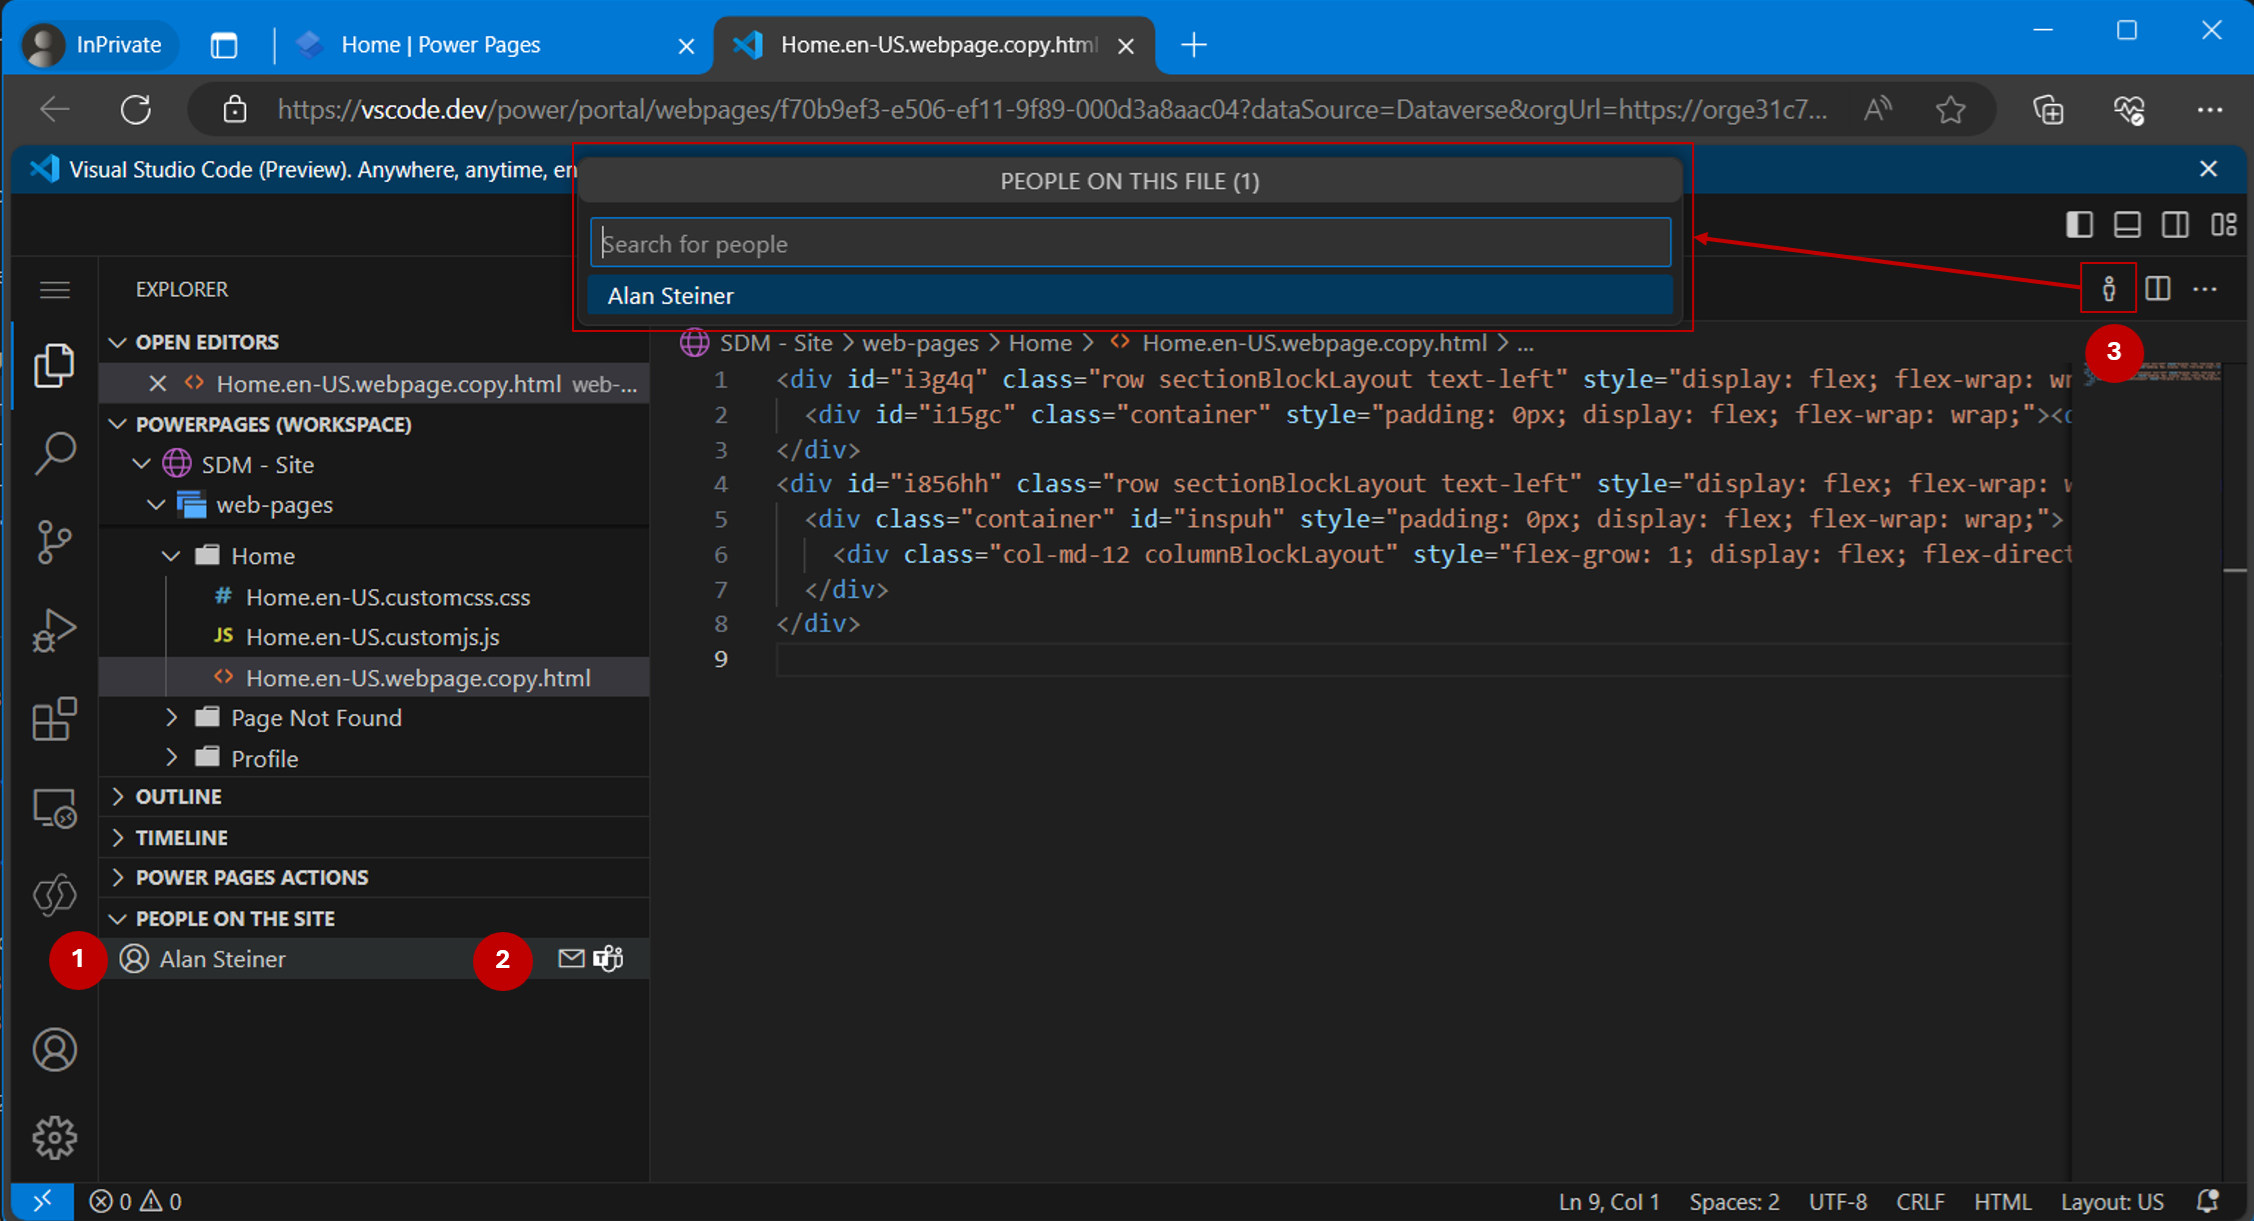 VSCode for the web Copresence features